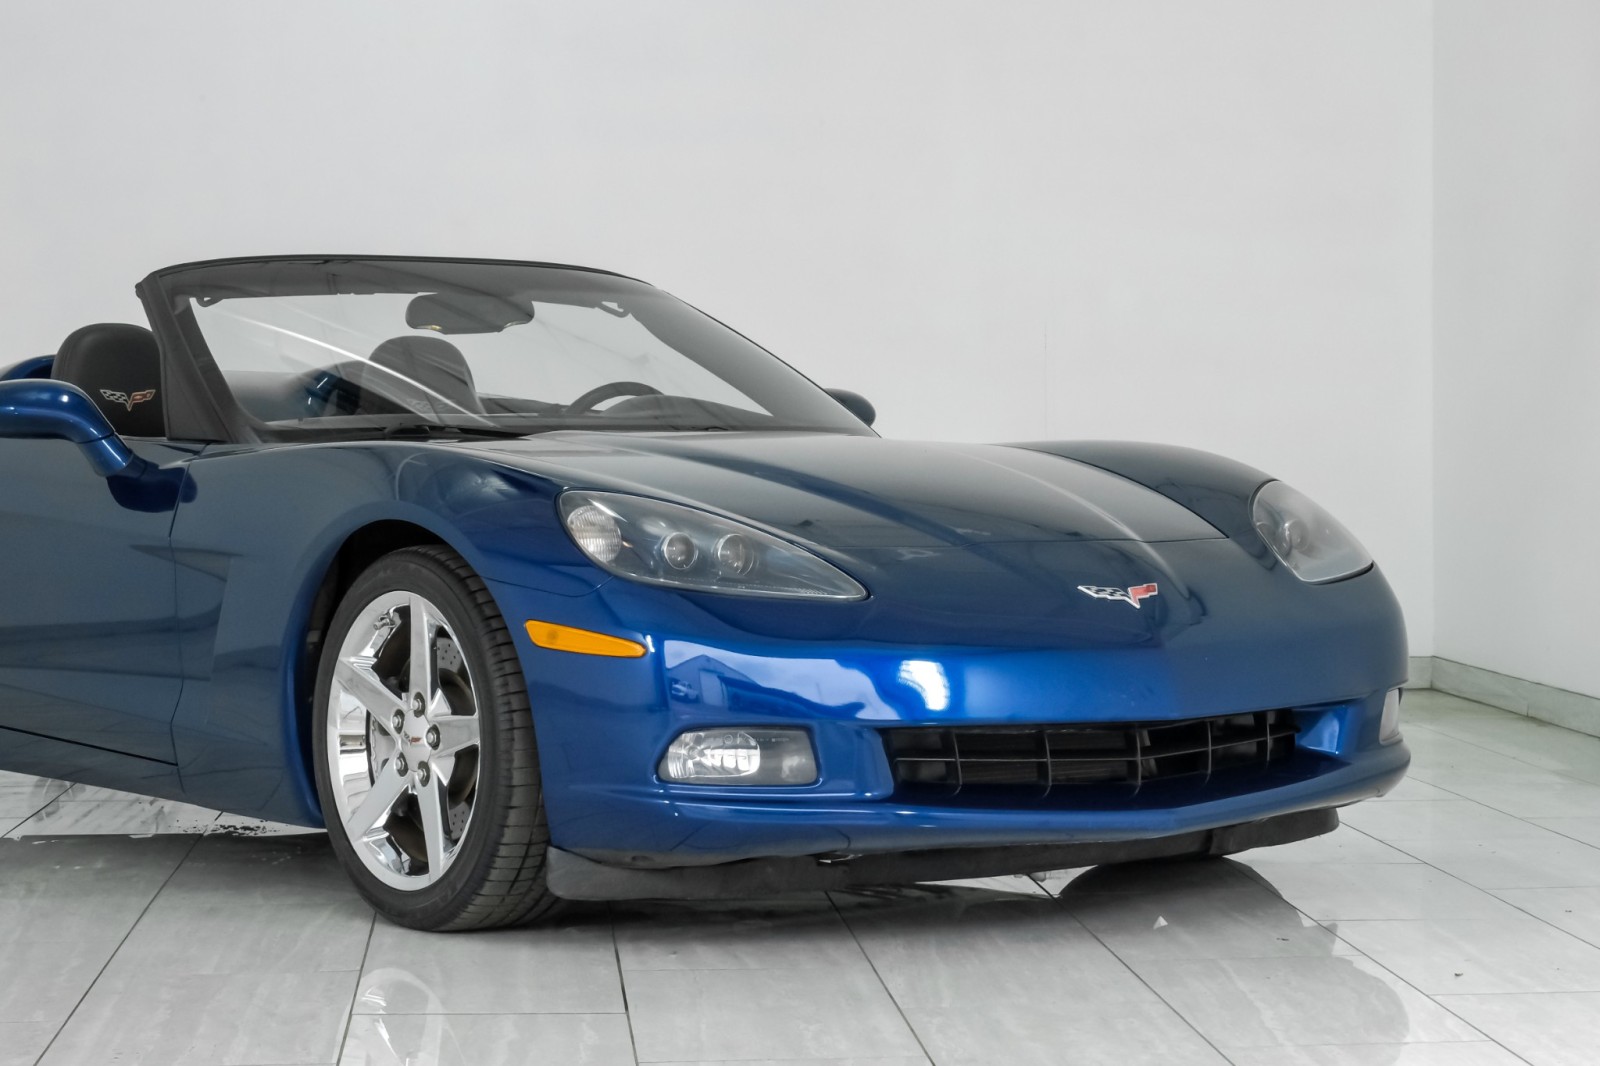 2007 Chevrolet Corvette Convertible AUTOMATIC NAVIGATION HEADUP DISPLAY LEATHER HEATED 5